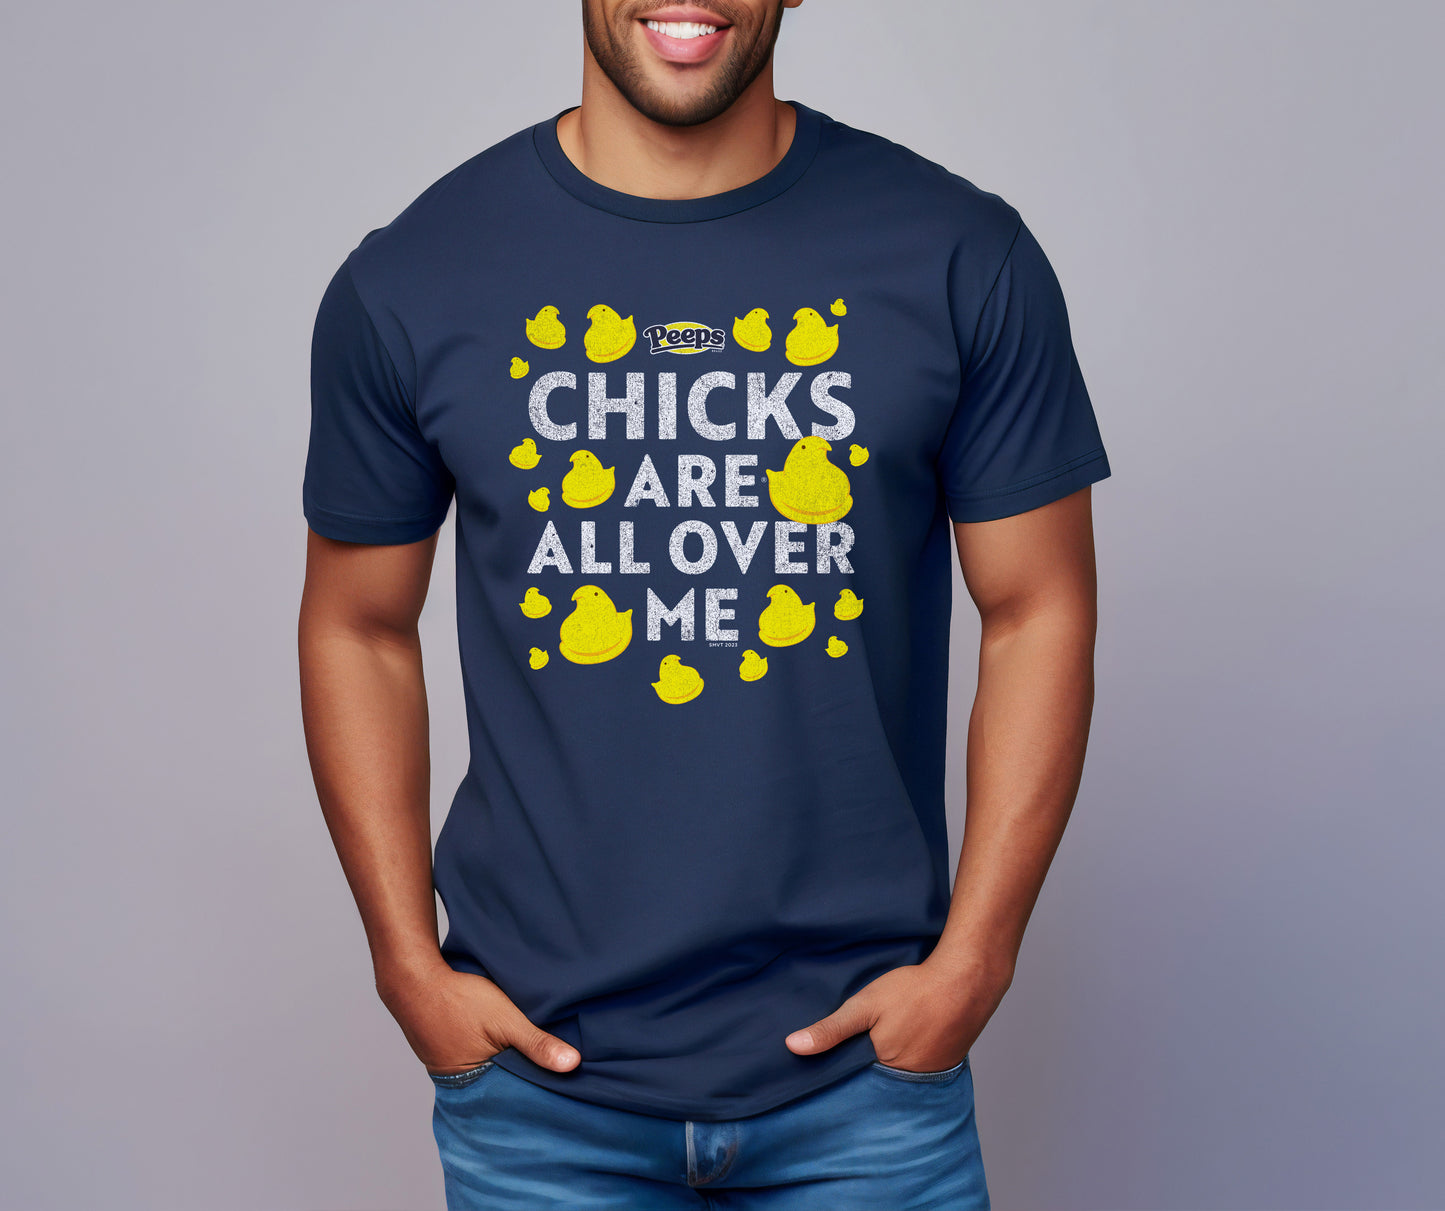 Peeps® Chicks Are All Over Me Unisex Graphic Tee